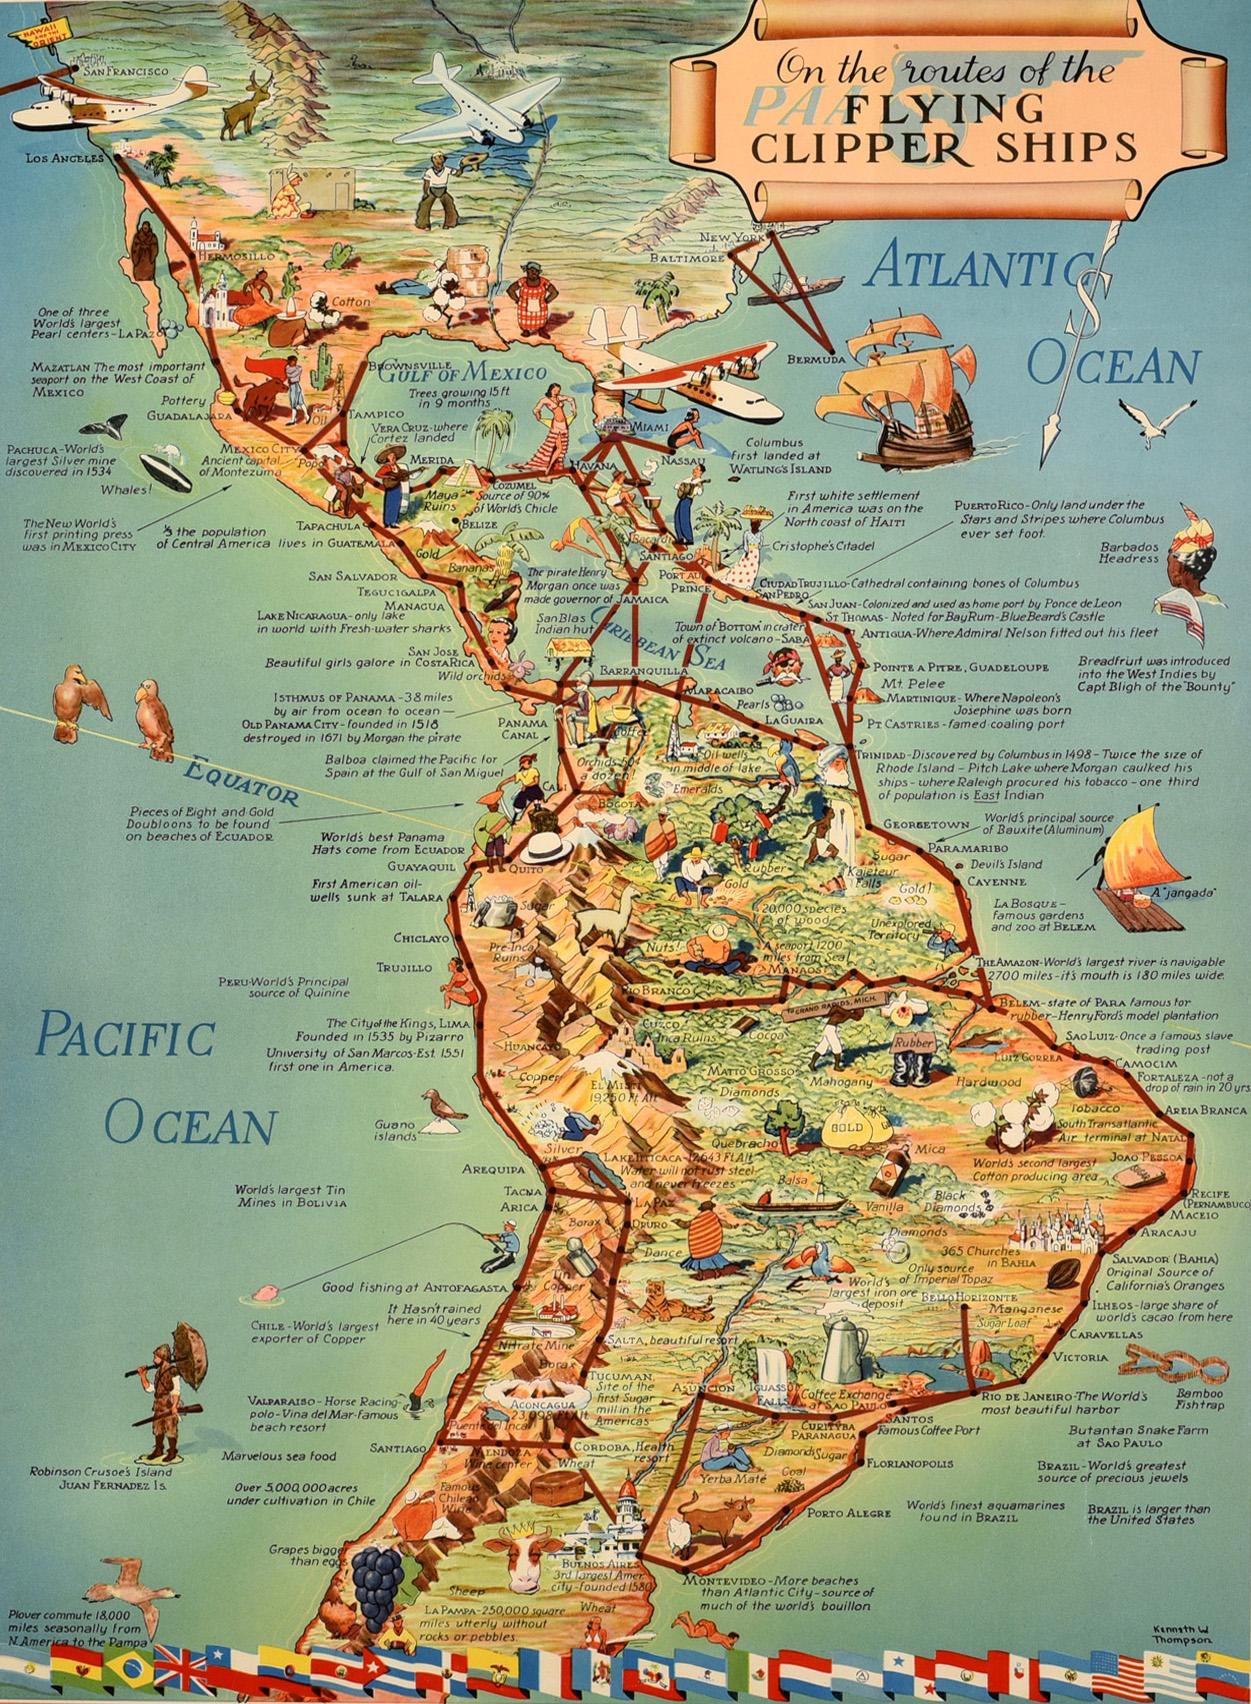 Original vintage Pan Am travel advertising map poster - On the routes of the Flying Clipper Ships - featuring a pictorial map by Kenneth W. Thompson (1907-1996) of Latin America with images of points of interest, cities, animals and people including